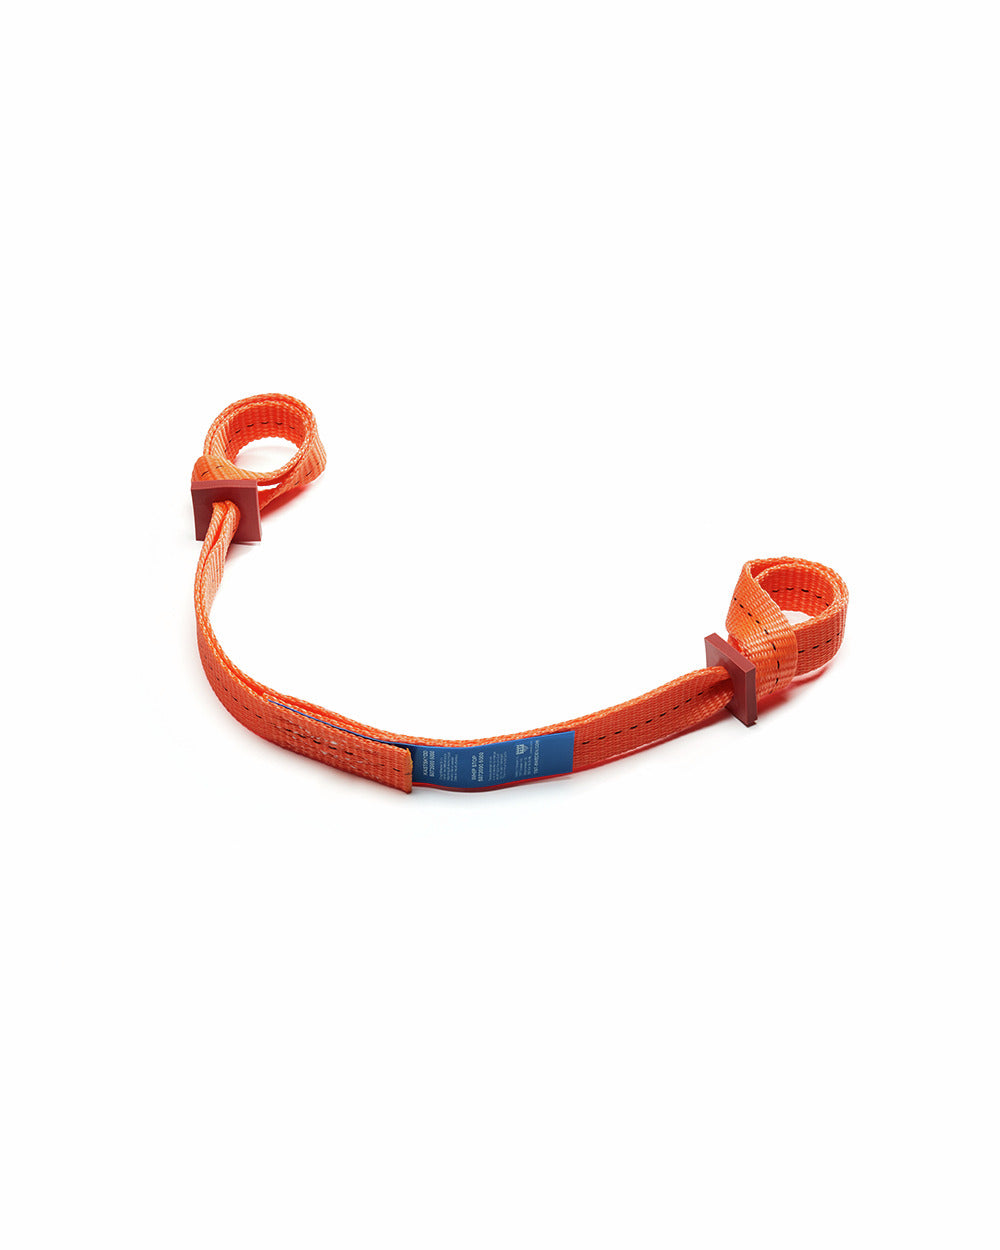 TST Whip stop / check - pack of 50  750 mm